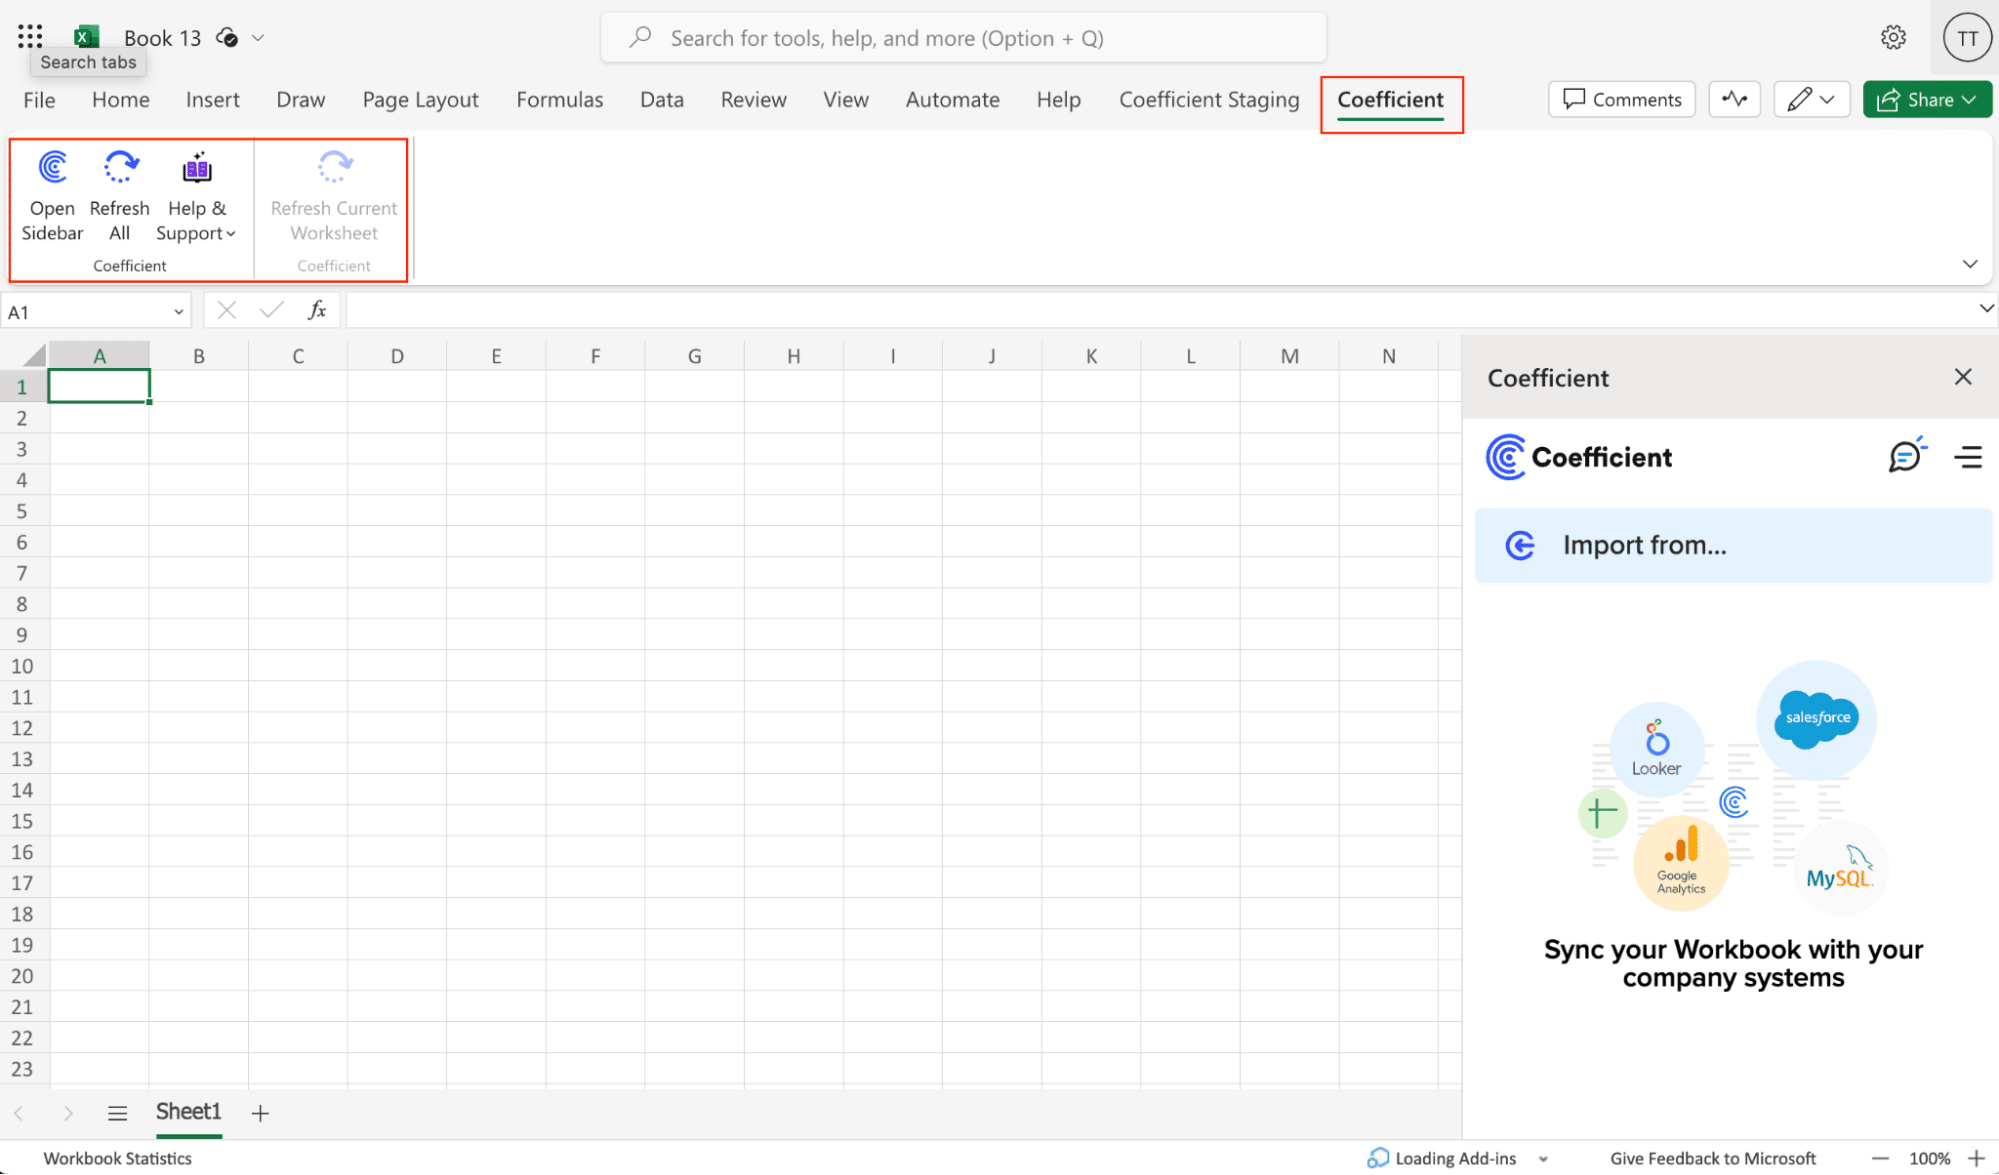 Launching Coefficient via the Open Sidebar option in Excel